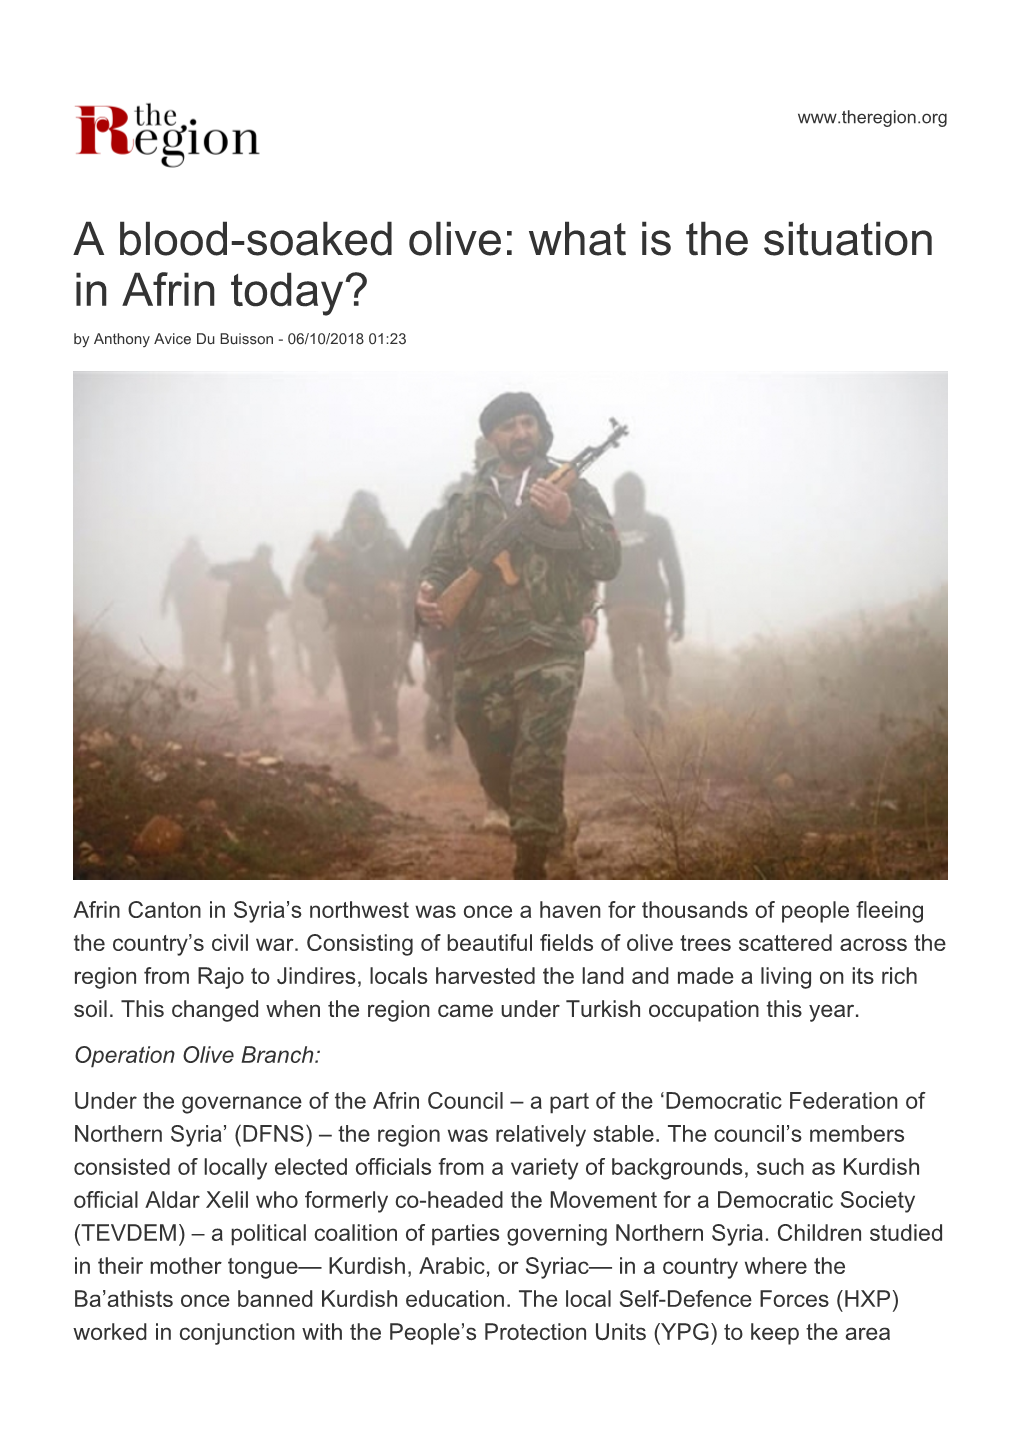 A Blood-Soaked Olive: What Is the Situation in Afrin Today? by Anthony Avice Du Buisson - 06/10/2018 01:23